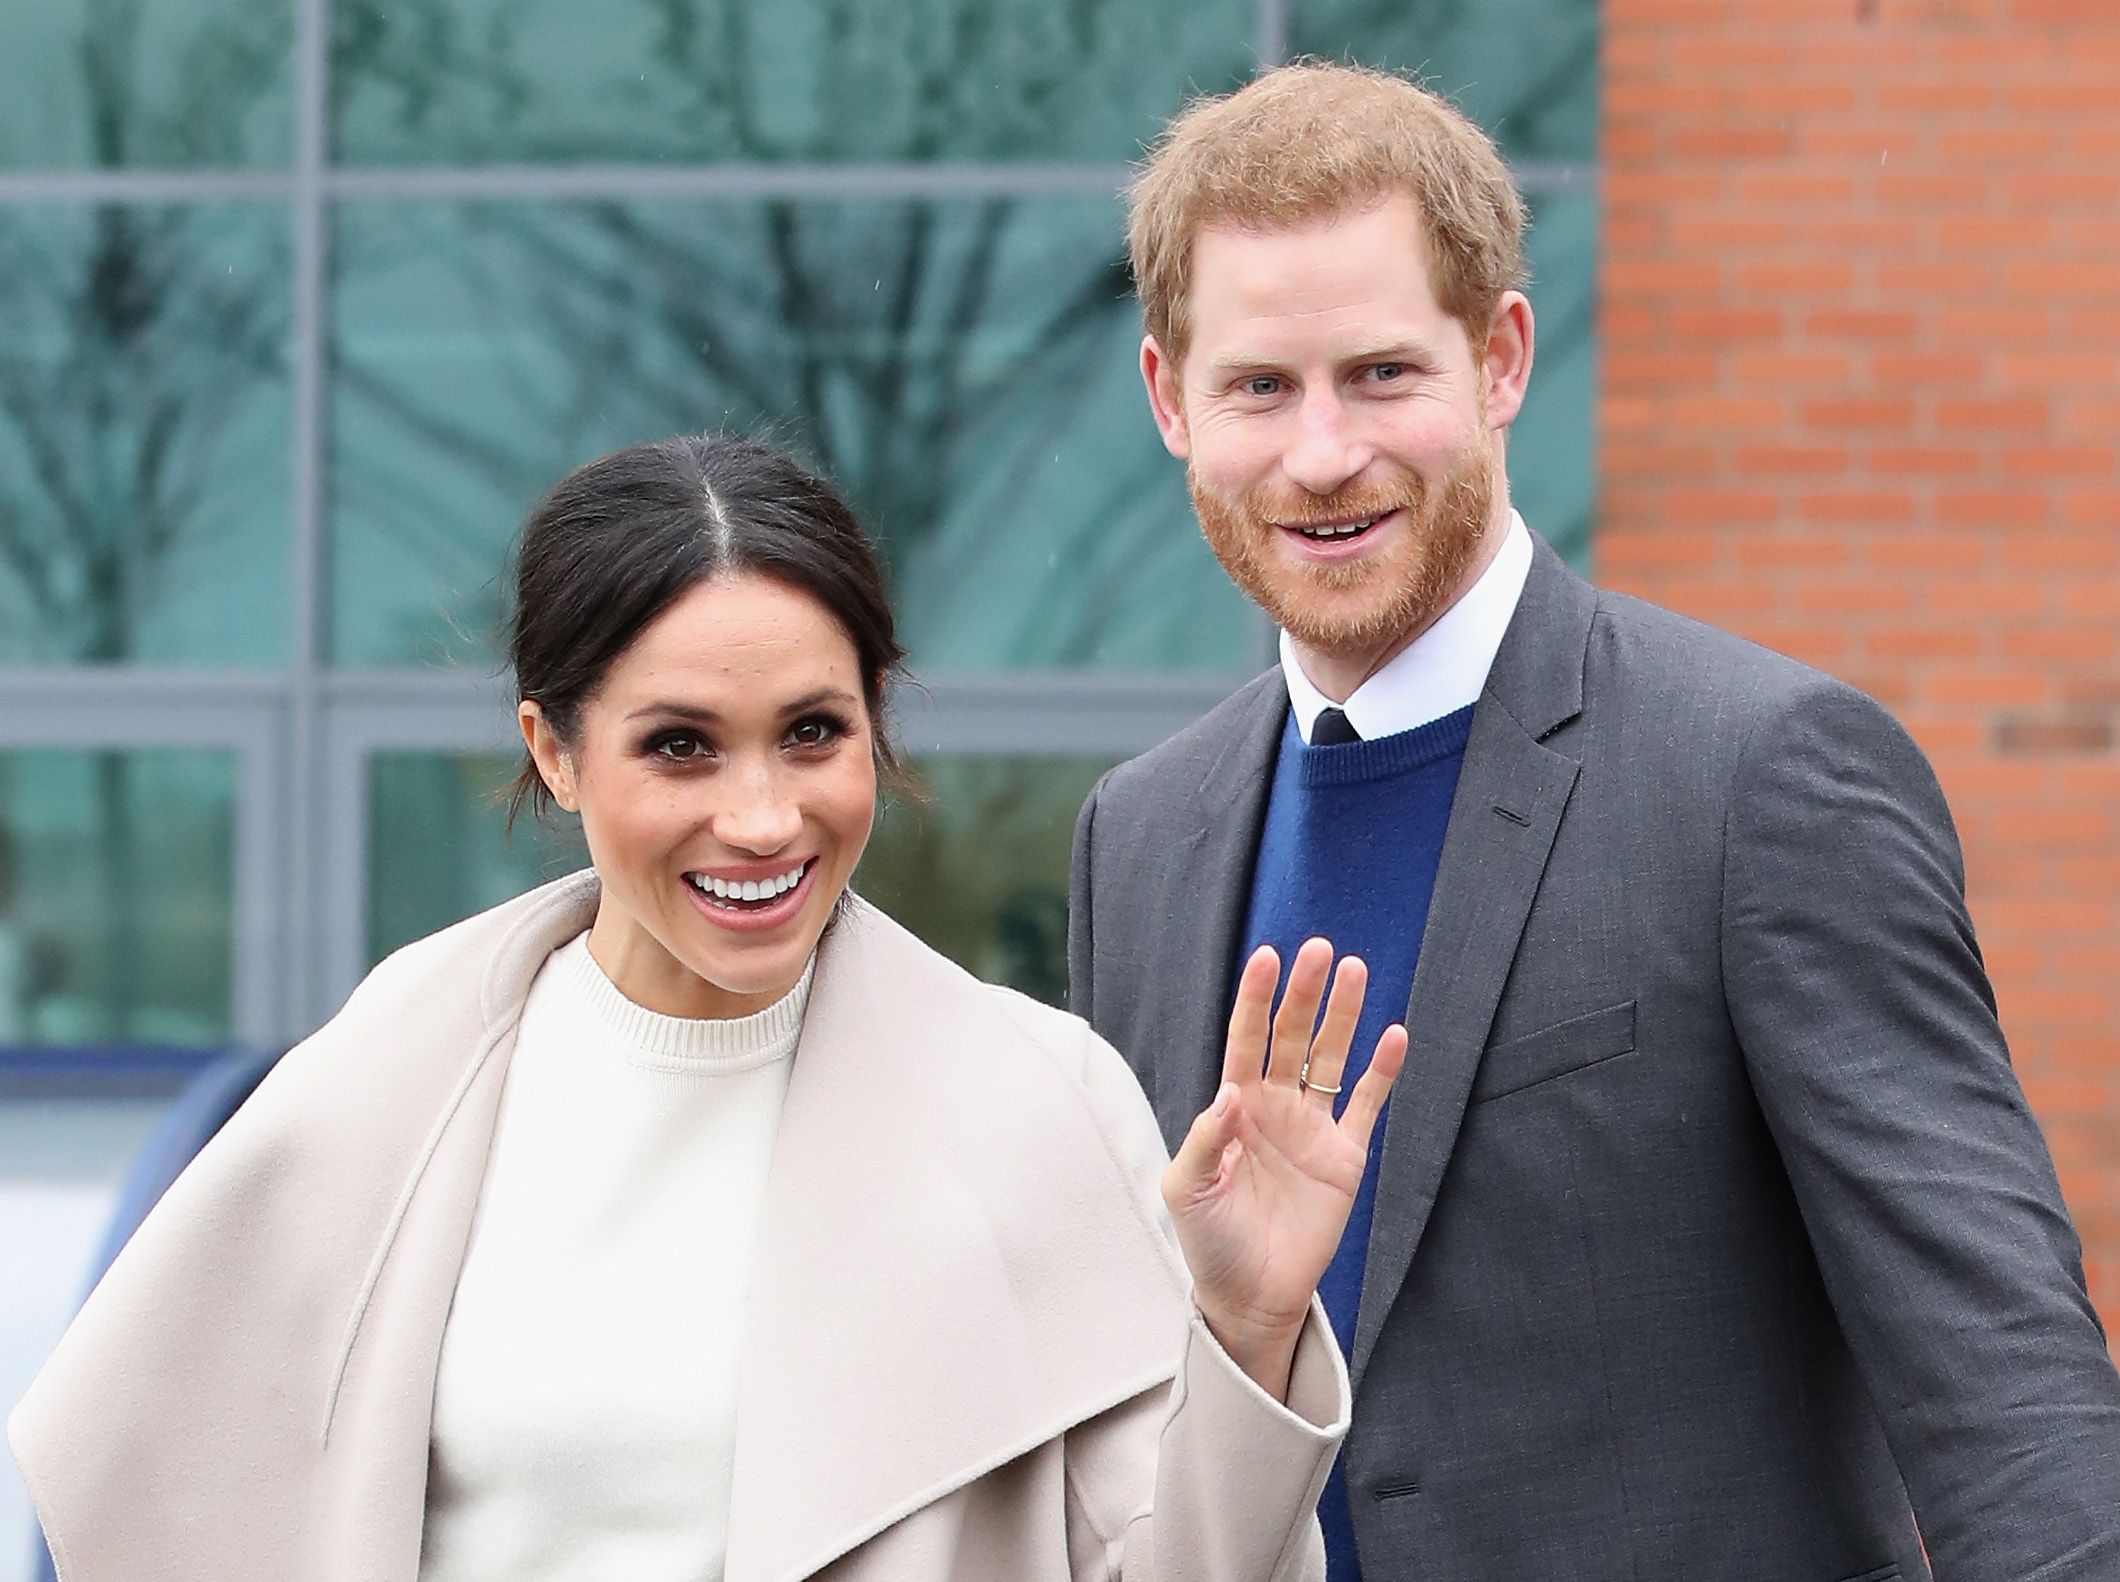 Prince Harry and Meghan Markle depart from Catalyst Inc, Northern Ireland's next generation science park on March 23, 2018 in Belfast, Nothern Ireland. | Photo: Getty Images